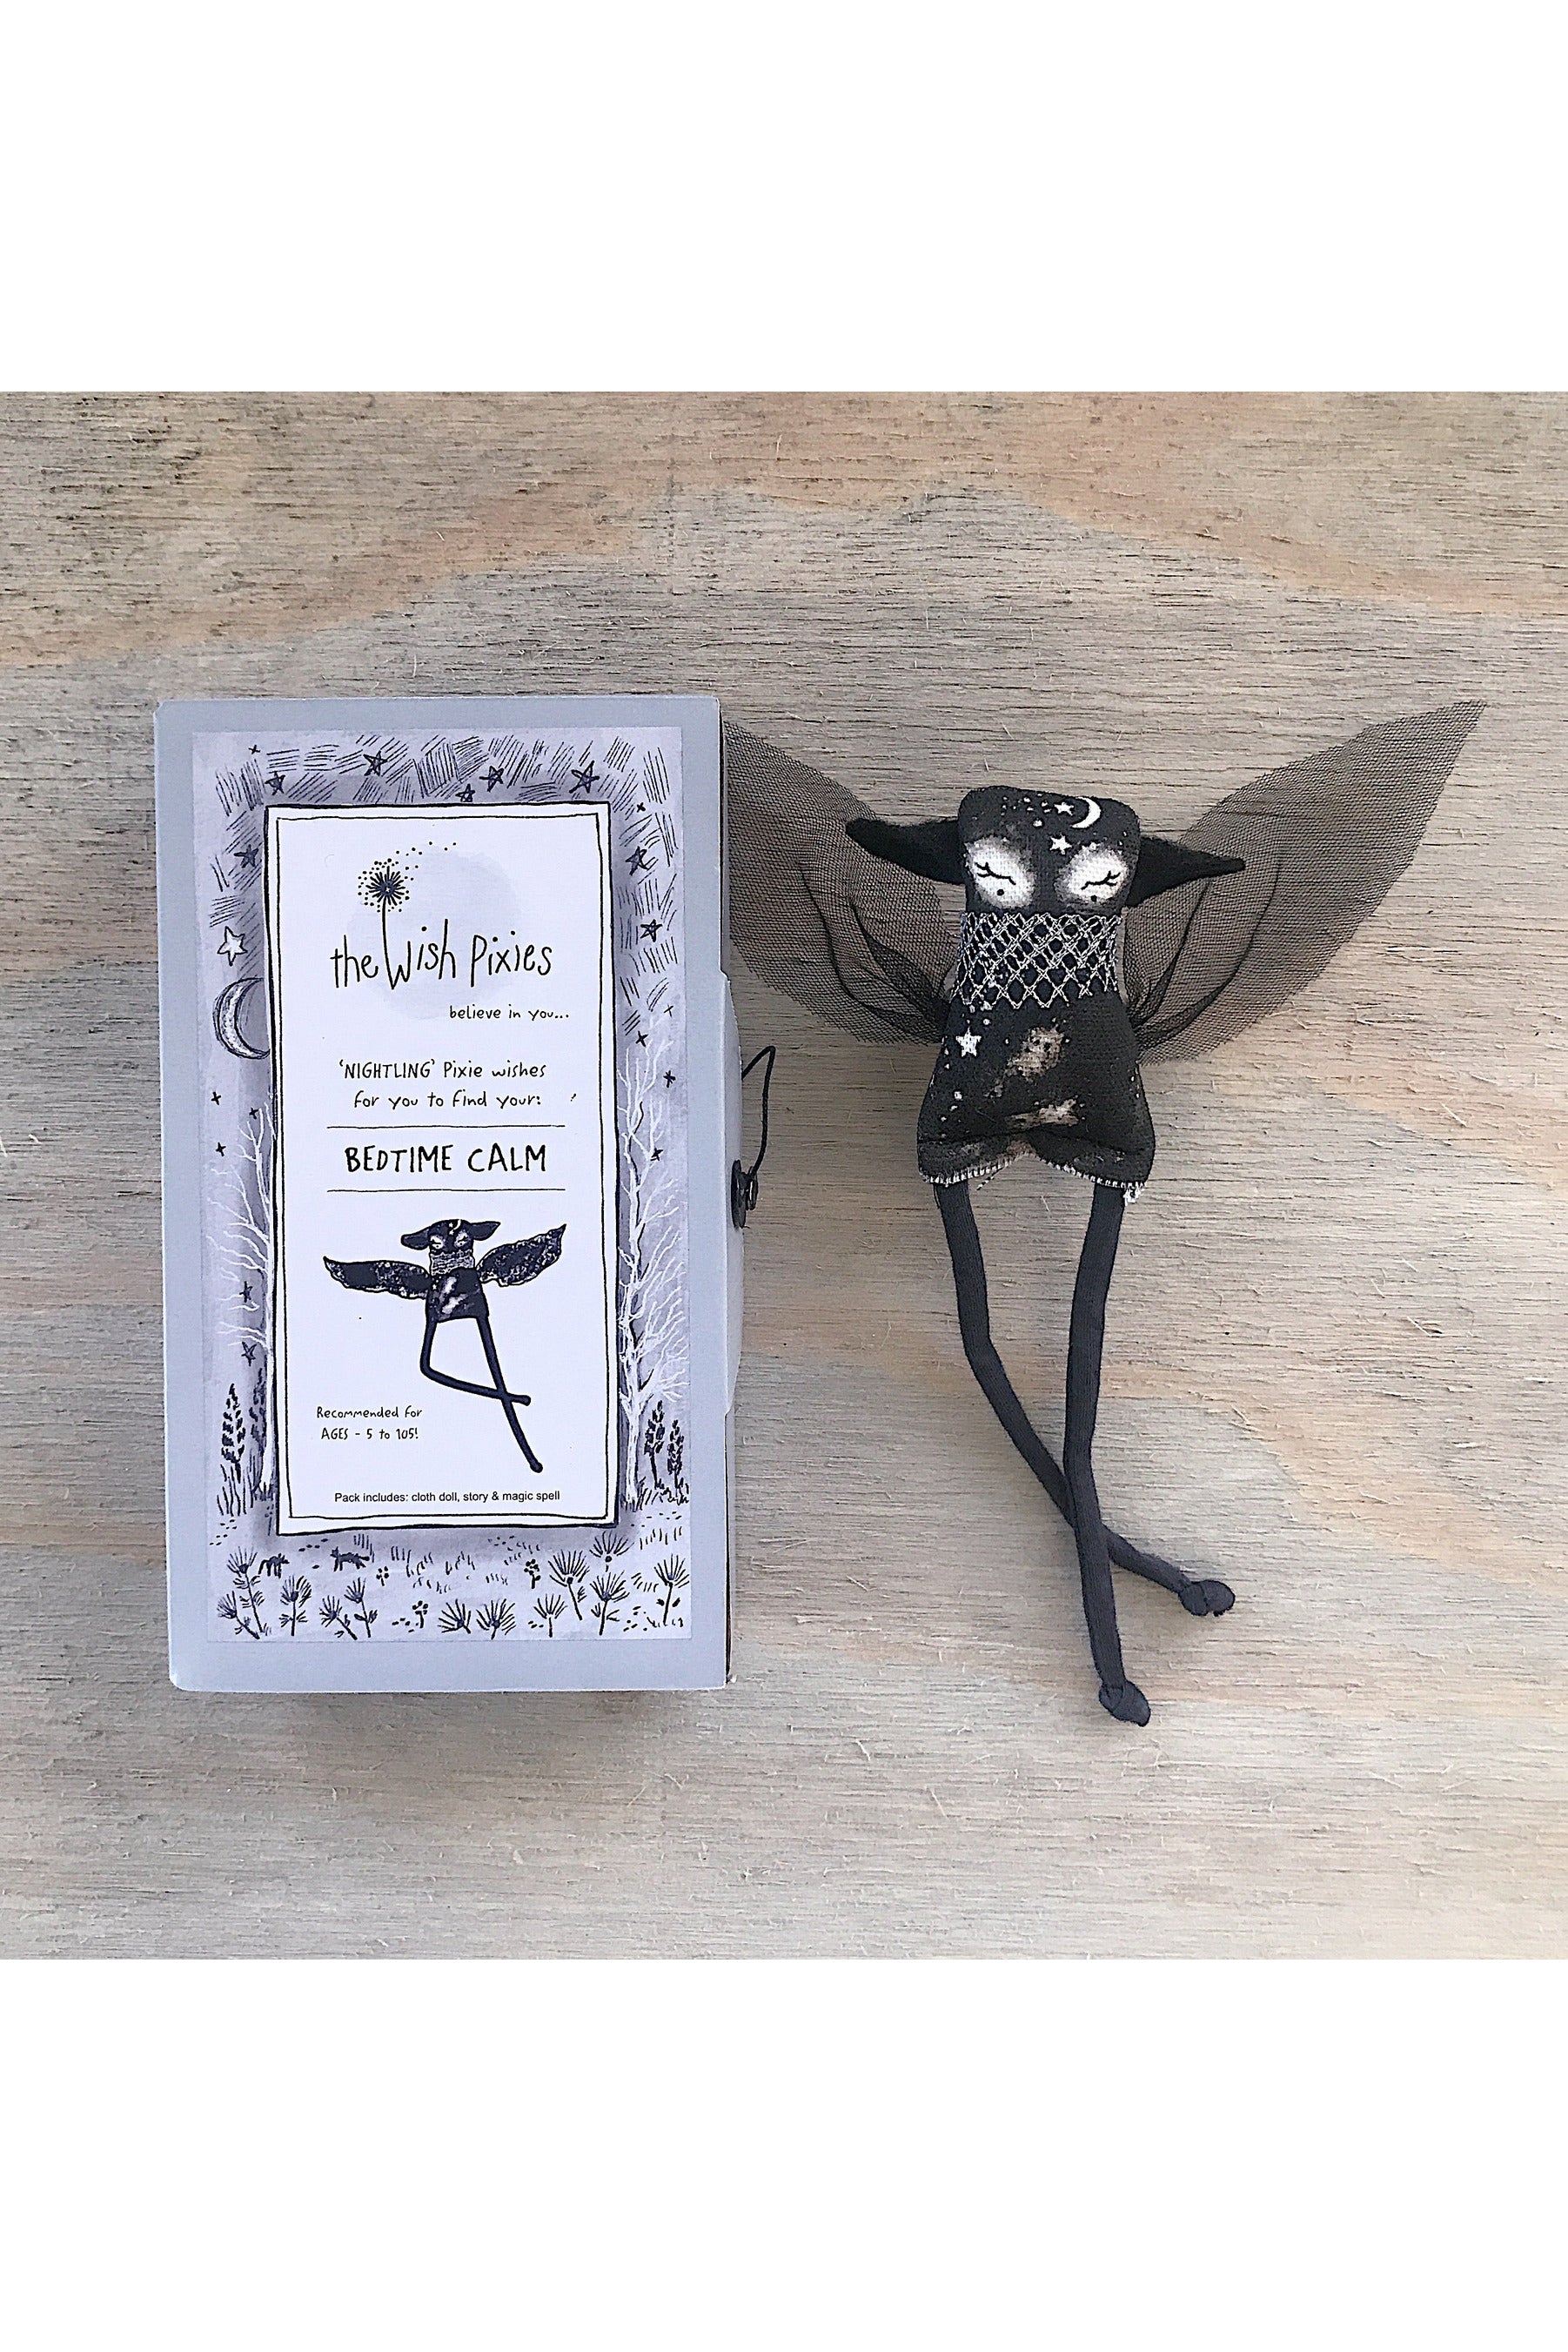 Nightling Wish Pixie - For Bedtime Calm